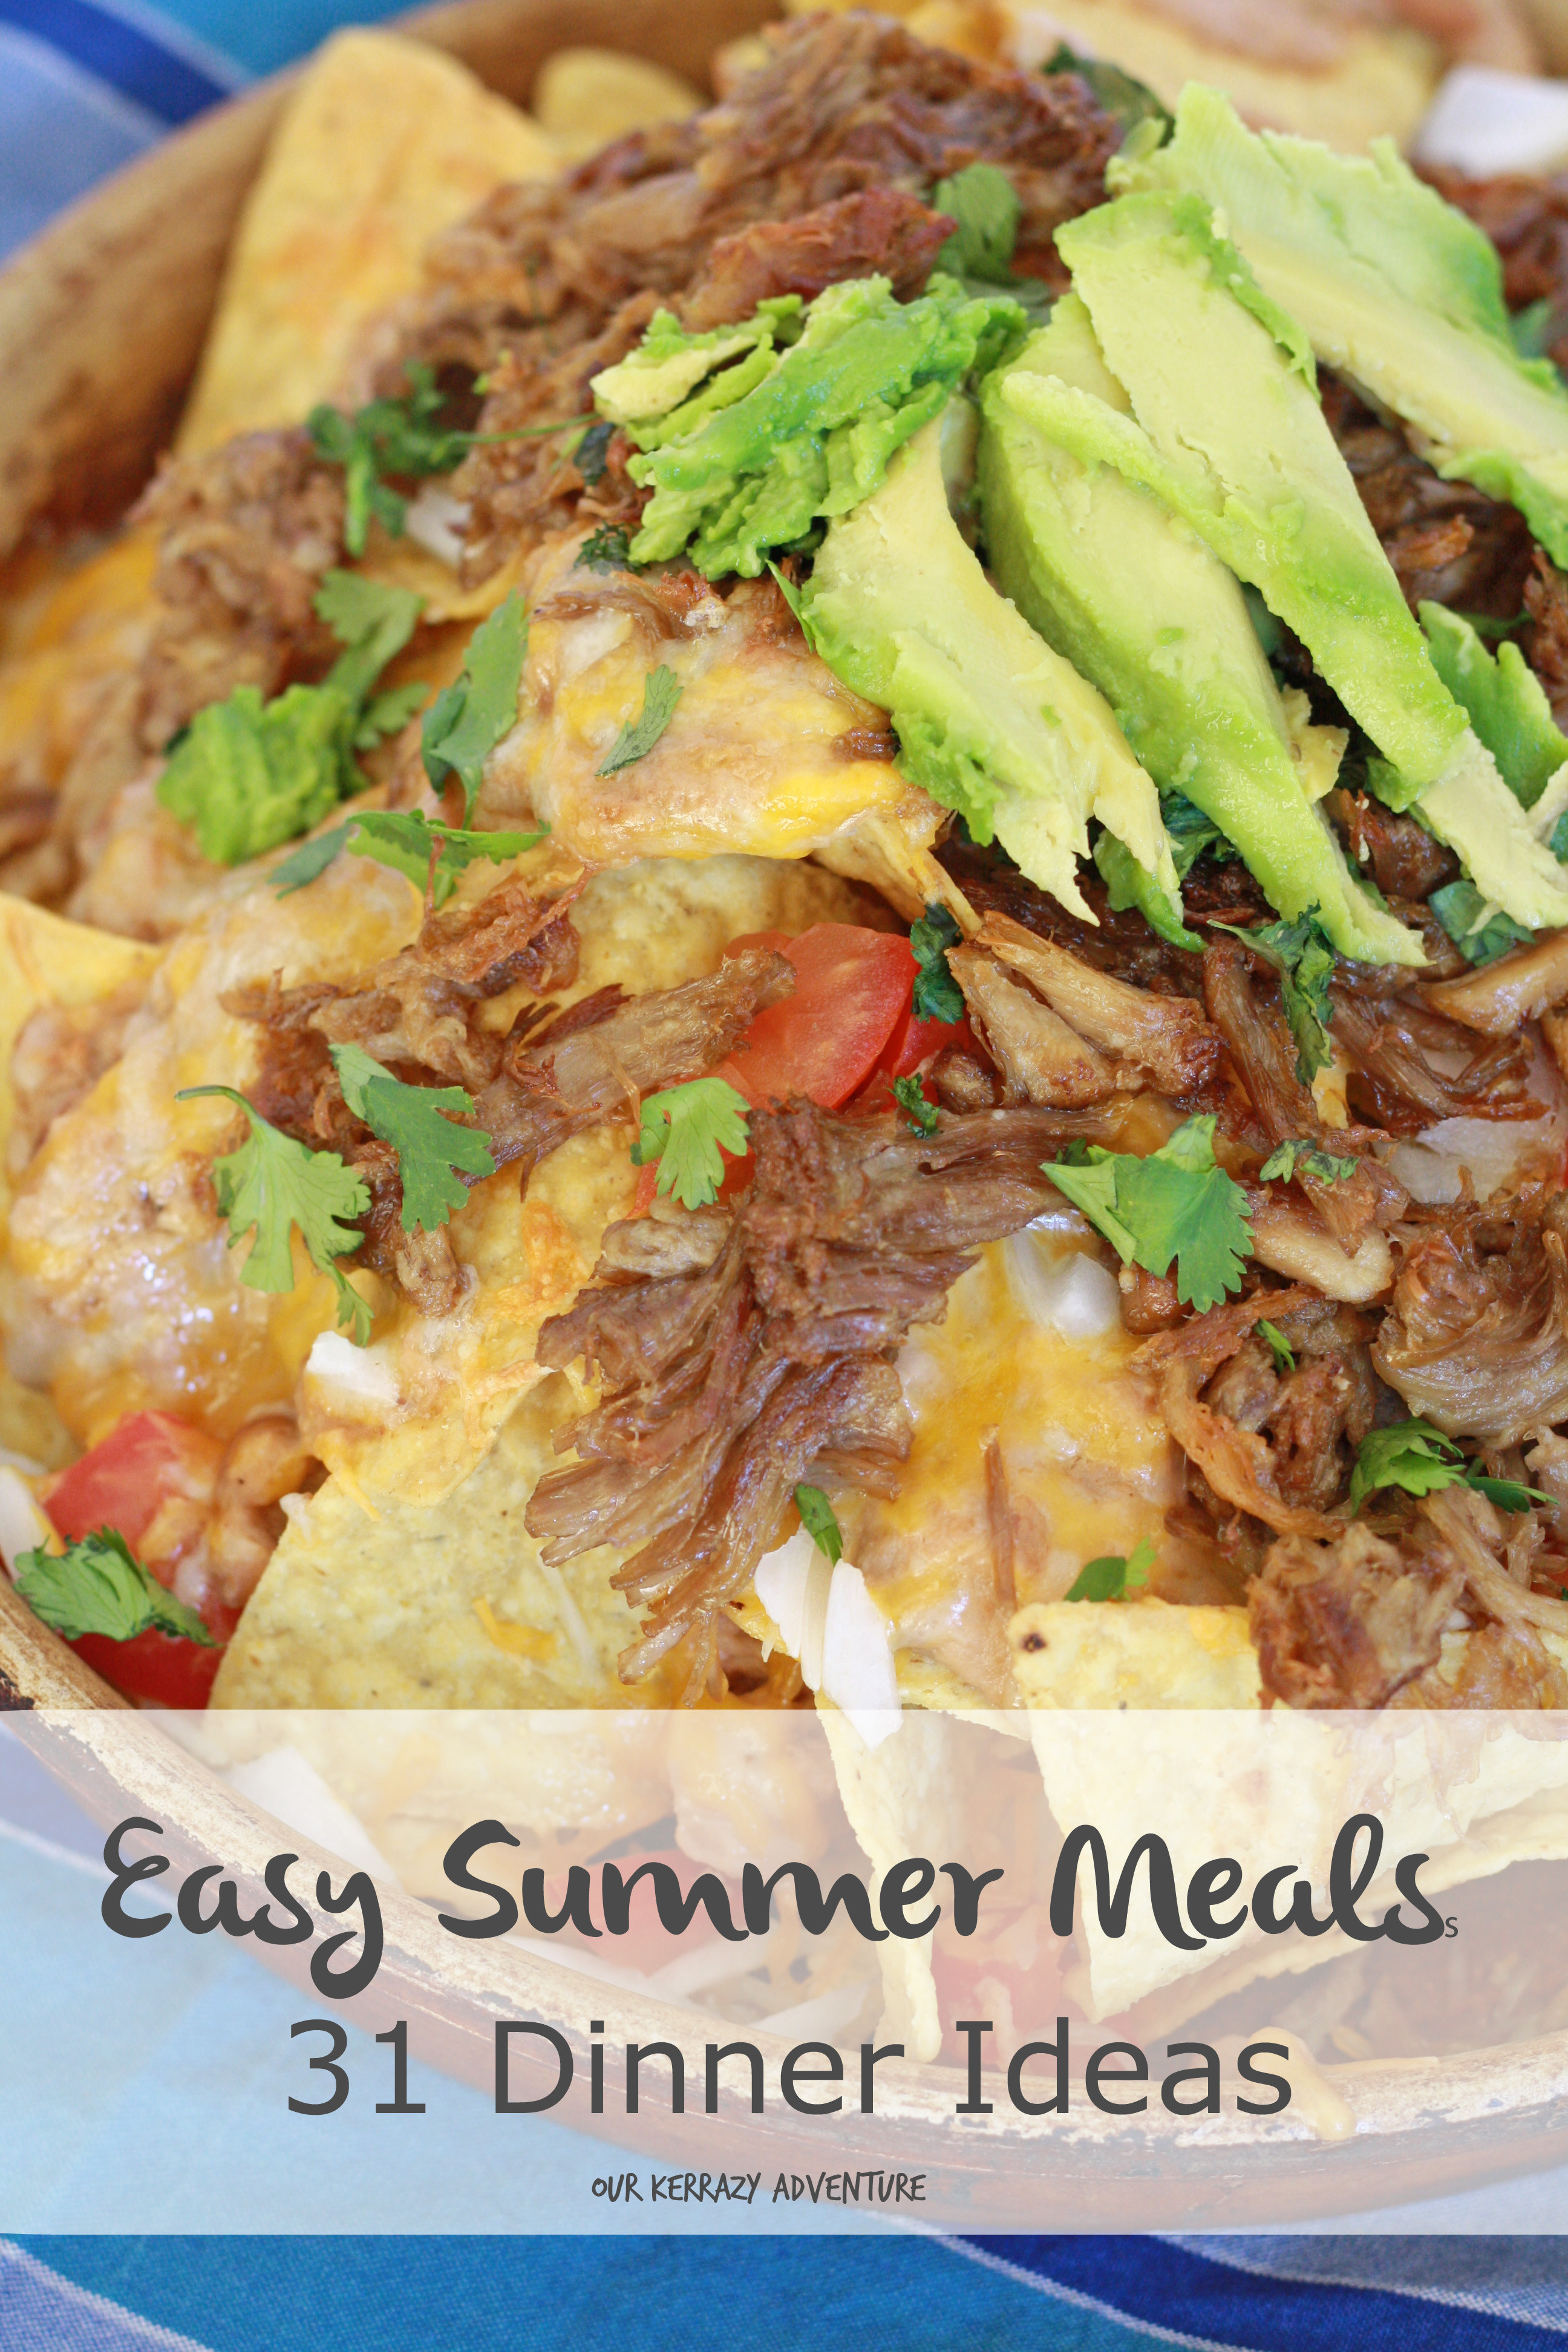 Easy Summer Dinners For Family
 Easy Summer Meals 31 Dinner Ideas Our Kerrazy Adventure